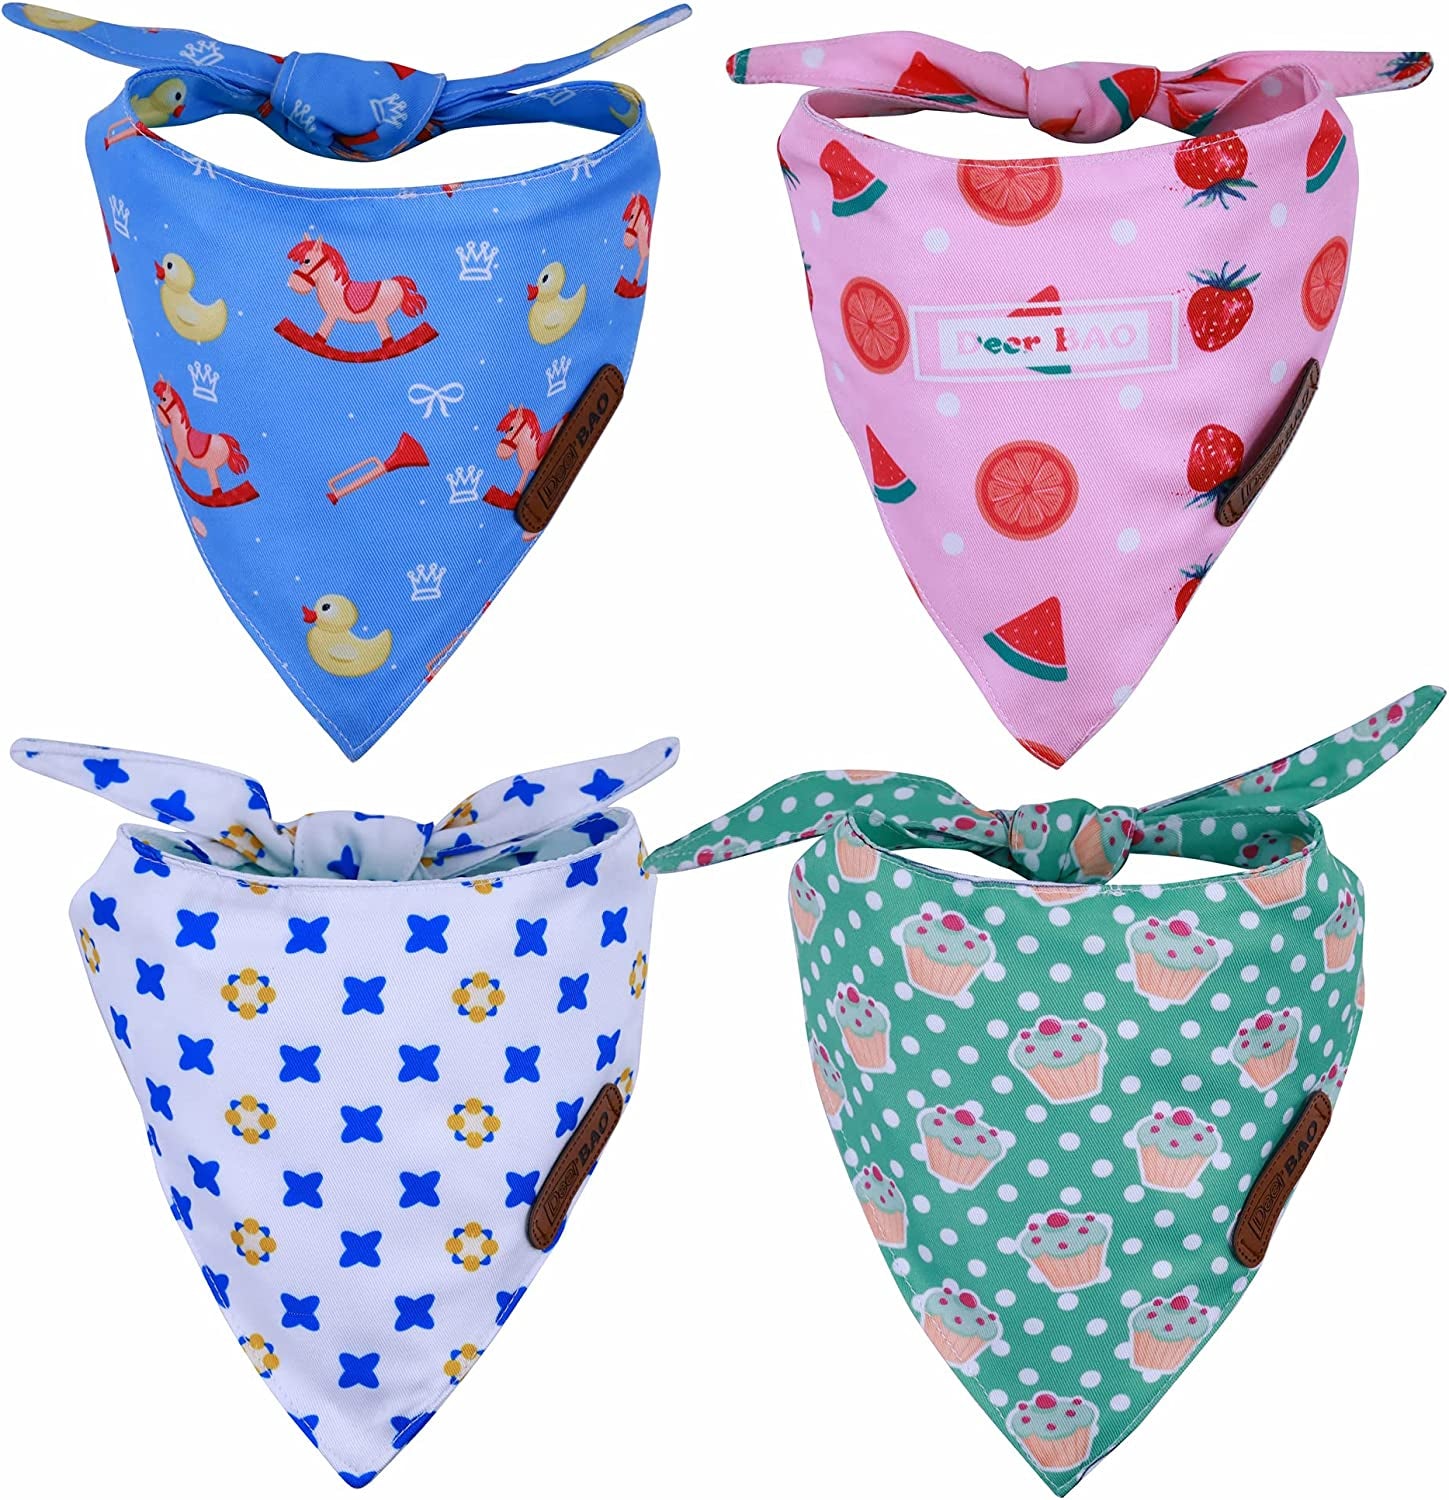 Deerbao Dog Bandanas 4Pack,Dog Scarf,Dog Bandanas Boygirl,Premium Durable Fabric,Adjustable Fit,Unique Shape,Suitable for All Kinds of Dogs,Provide Various Sizes (Large, Classic Plaid) Animals & Pet Supplies > Pet Supplies > Dog Supplies > Dog Apparel DeerBAO Cute pattern Large 